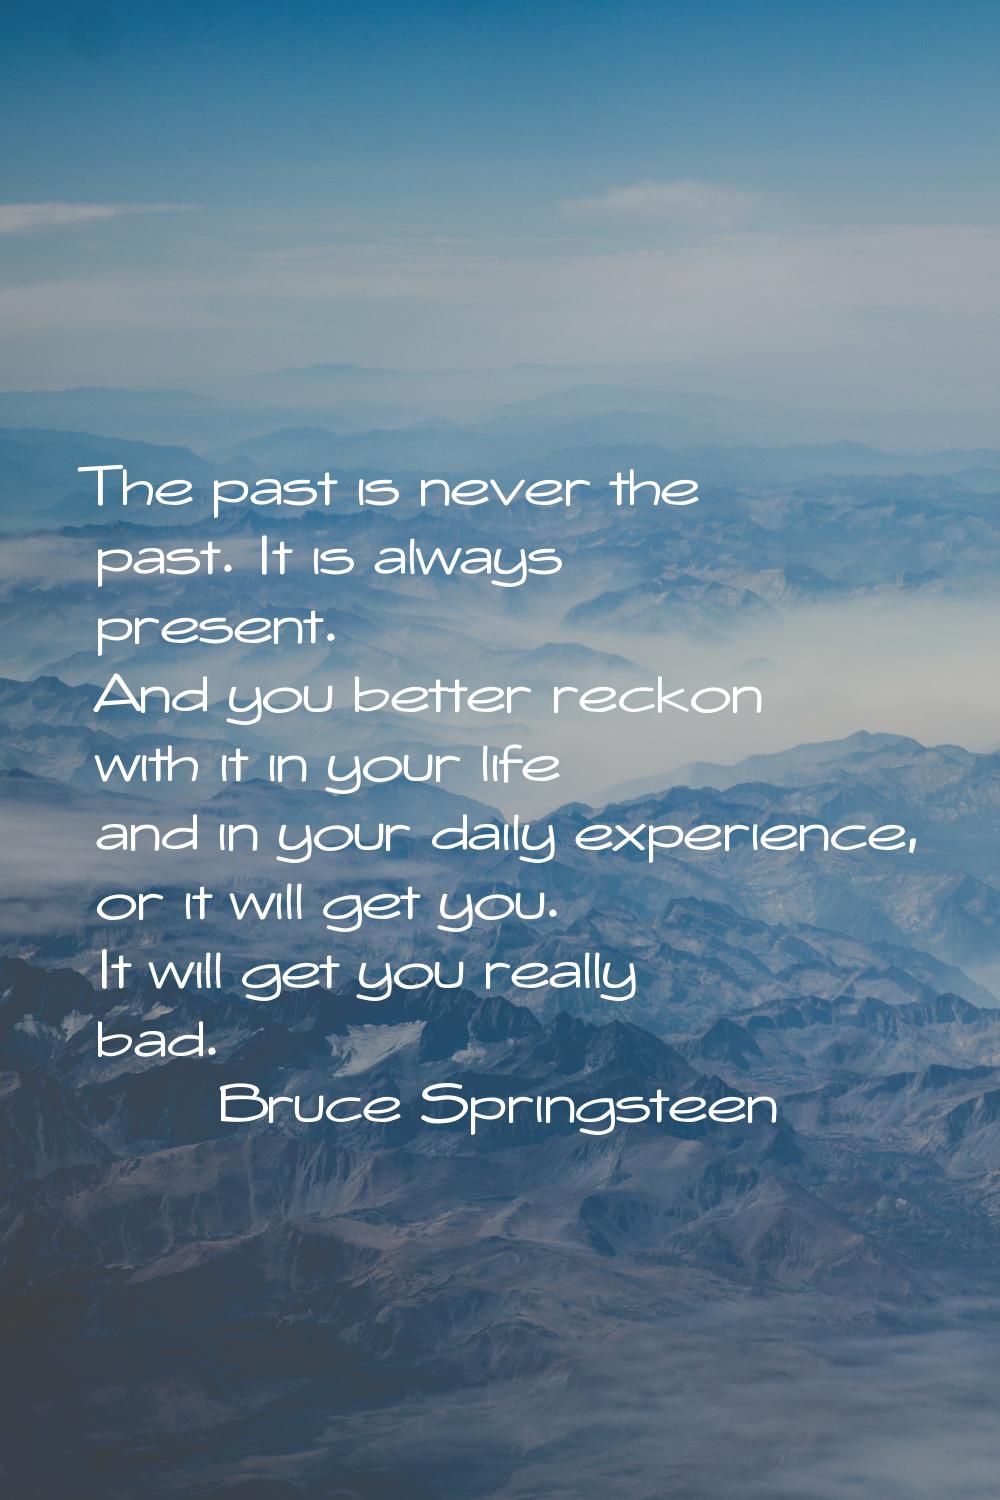 The past is never the past. It is always present. And you better reckon with it in your life and in